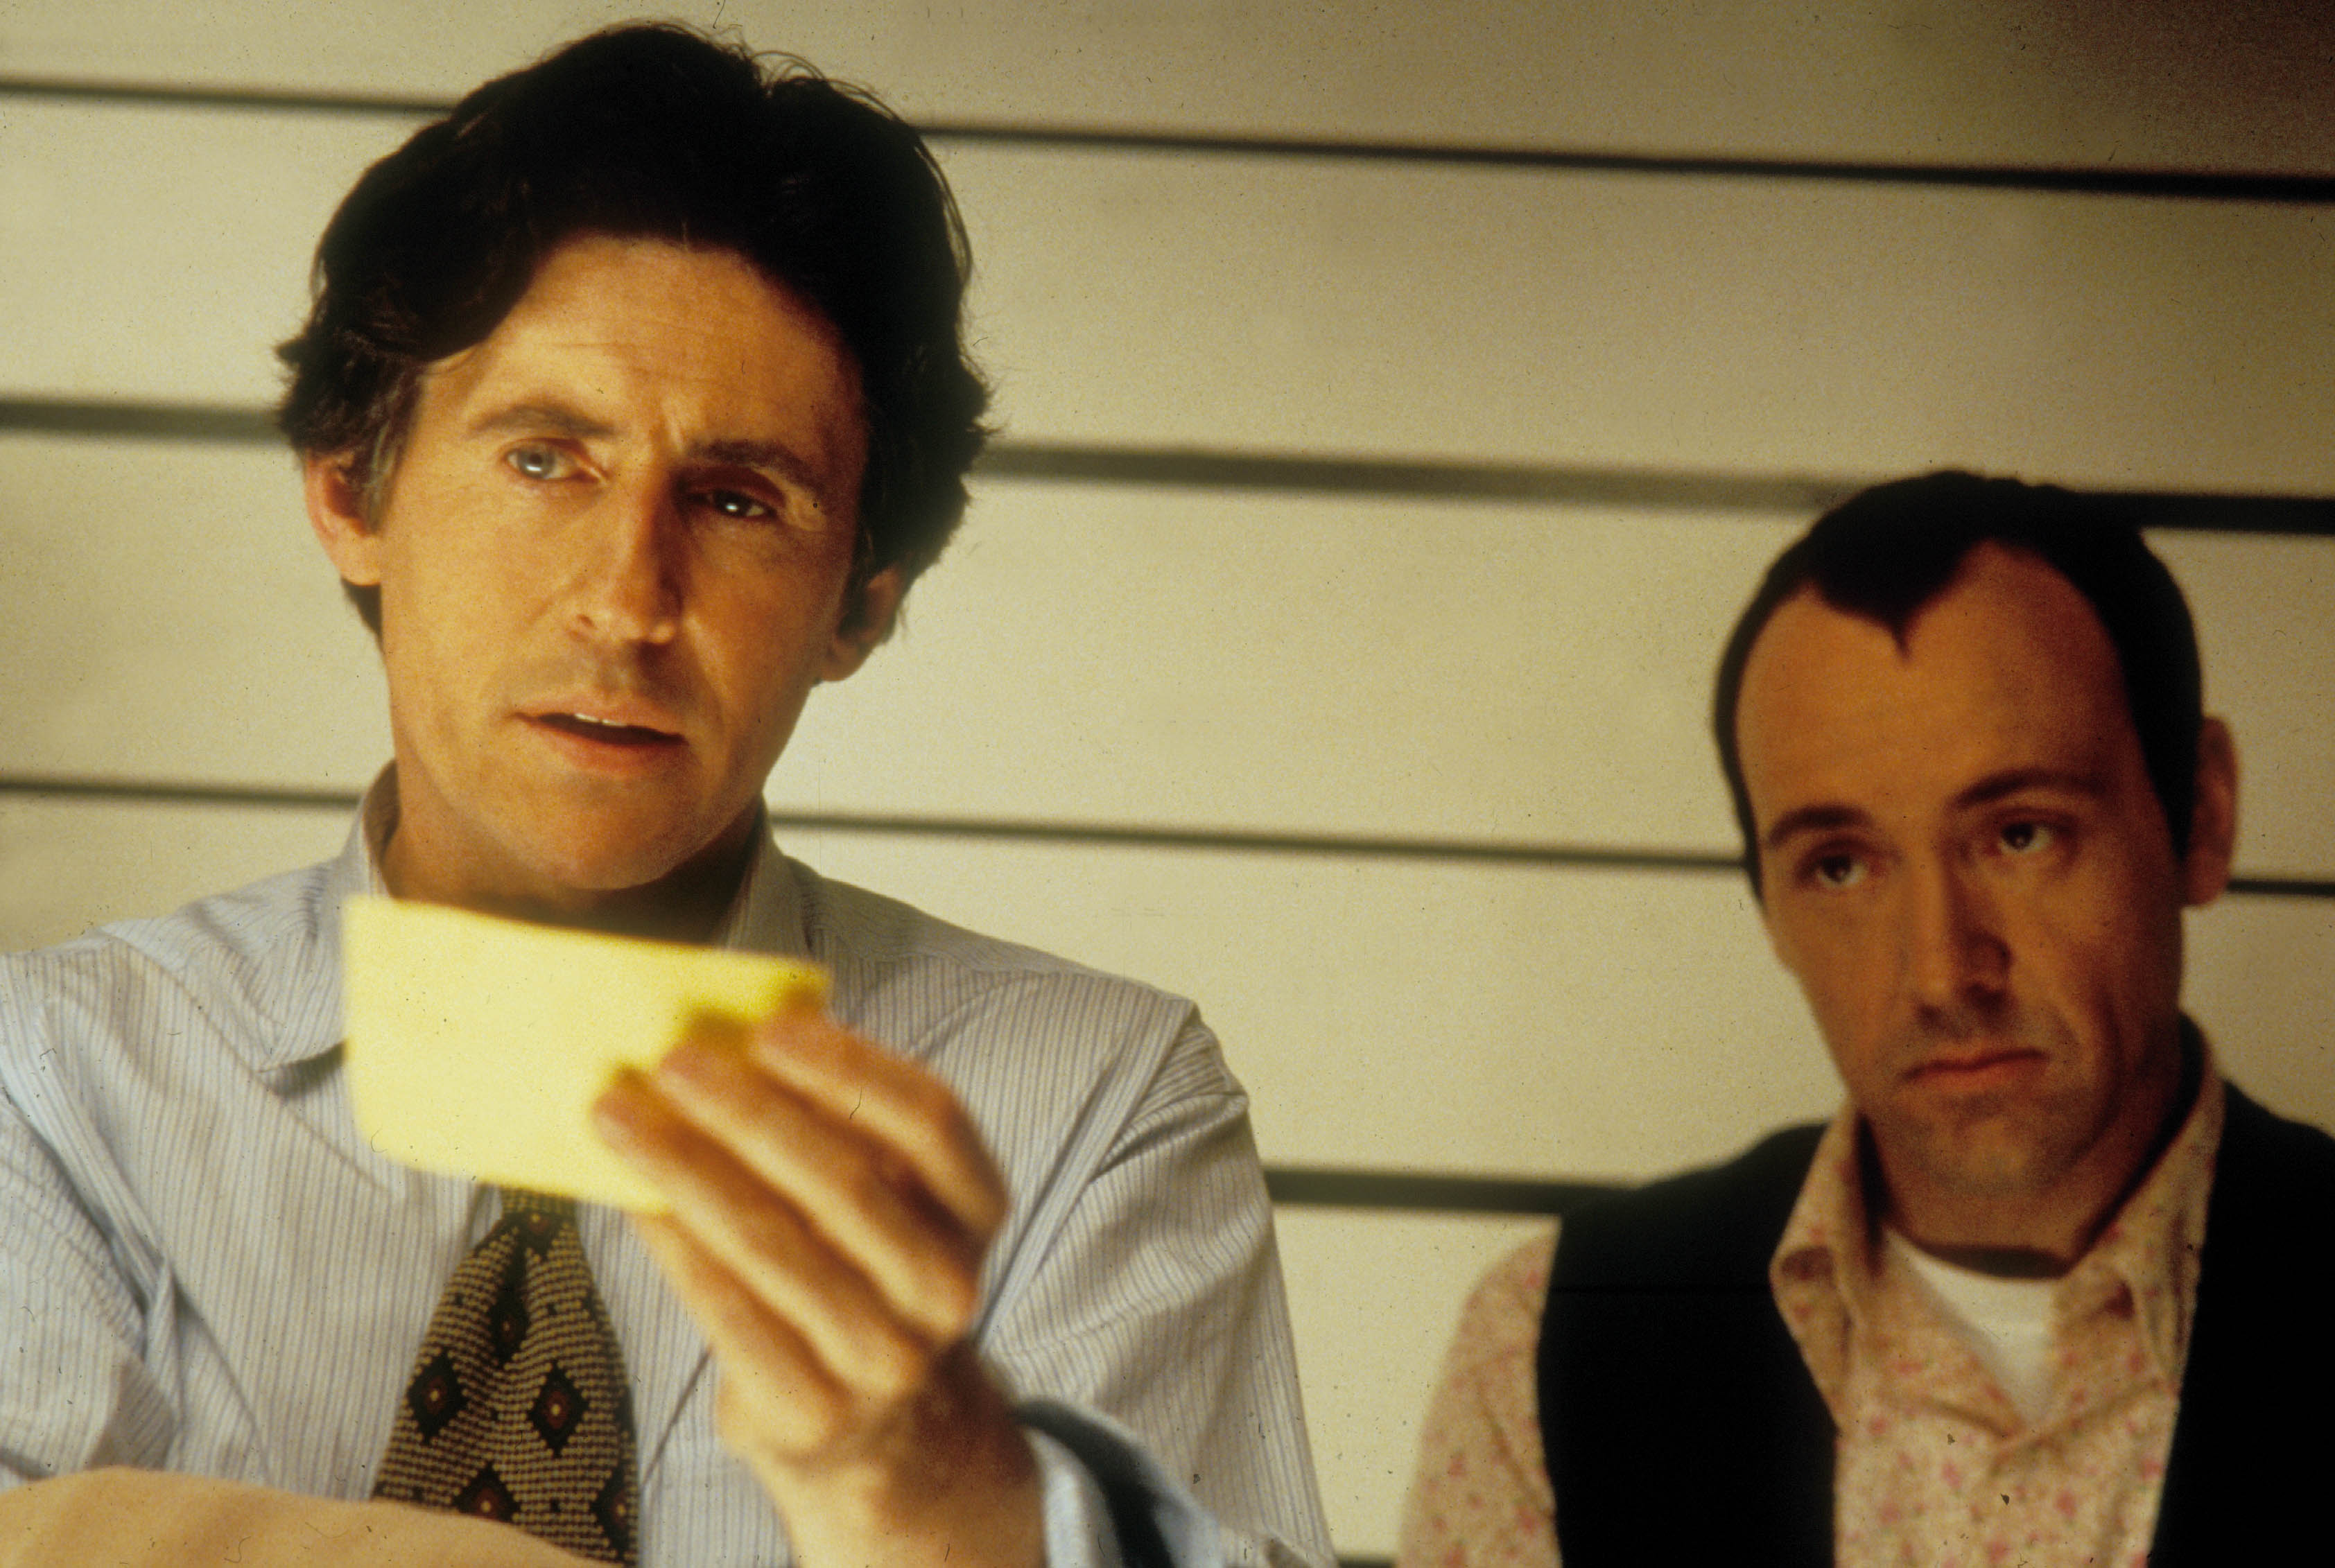 Spacey in the film that won him his first Oscar, ‘The Usual Suspects’, with Gabriel Byrne